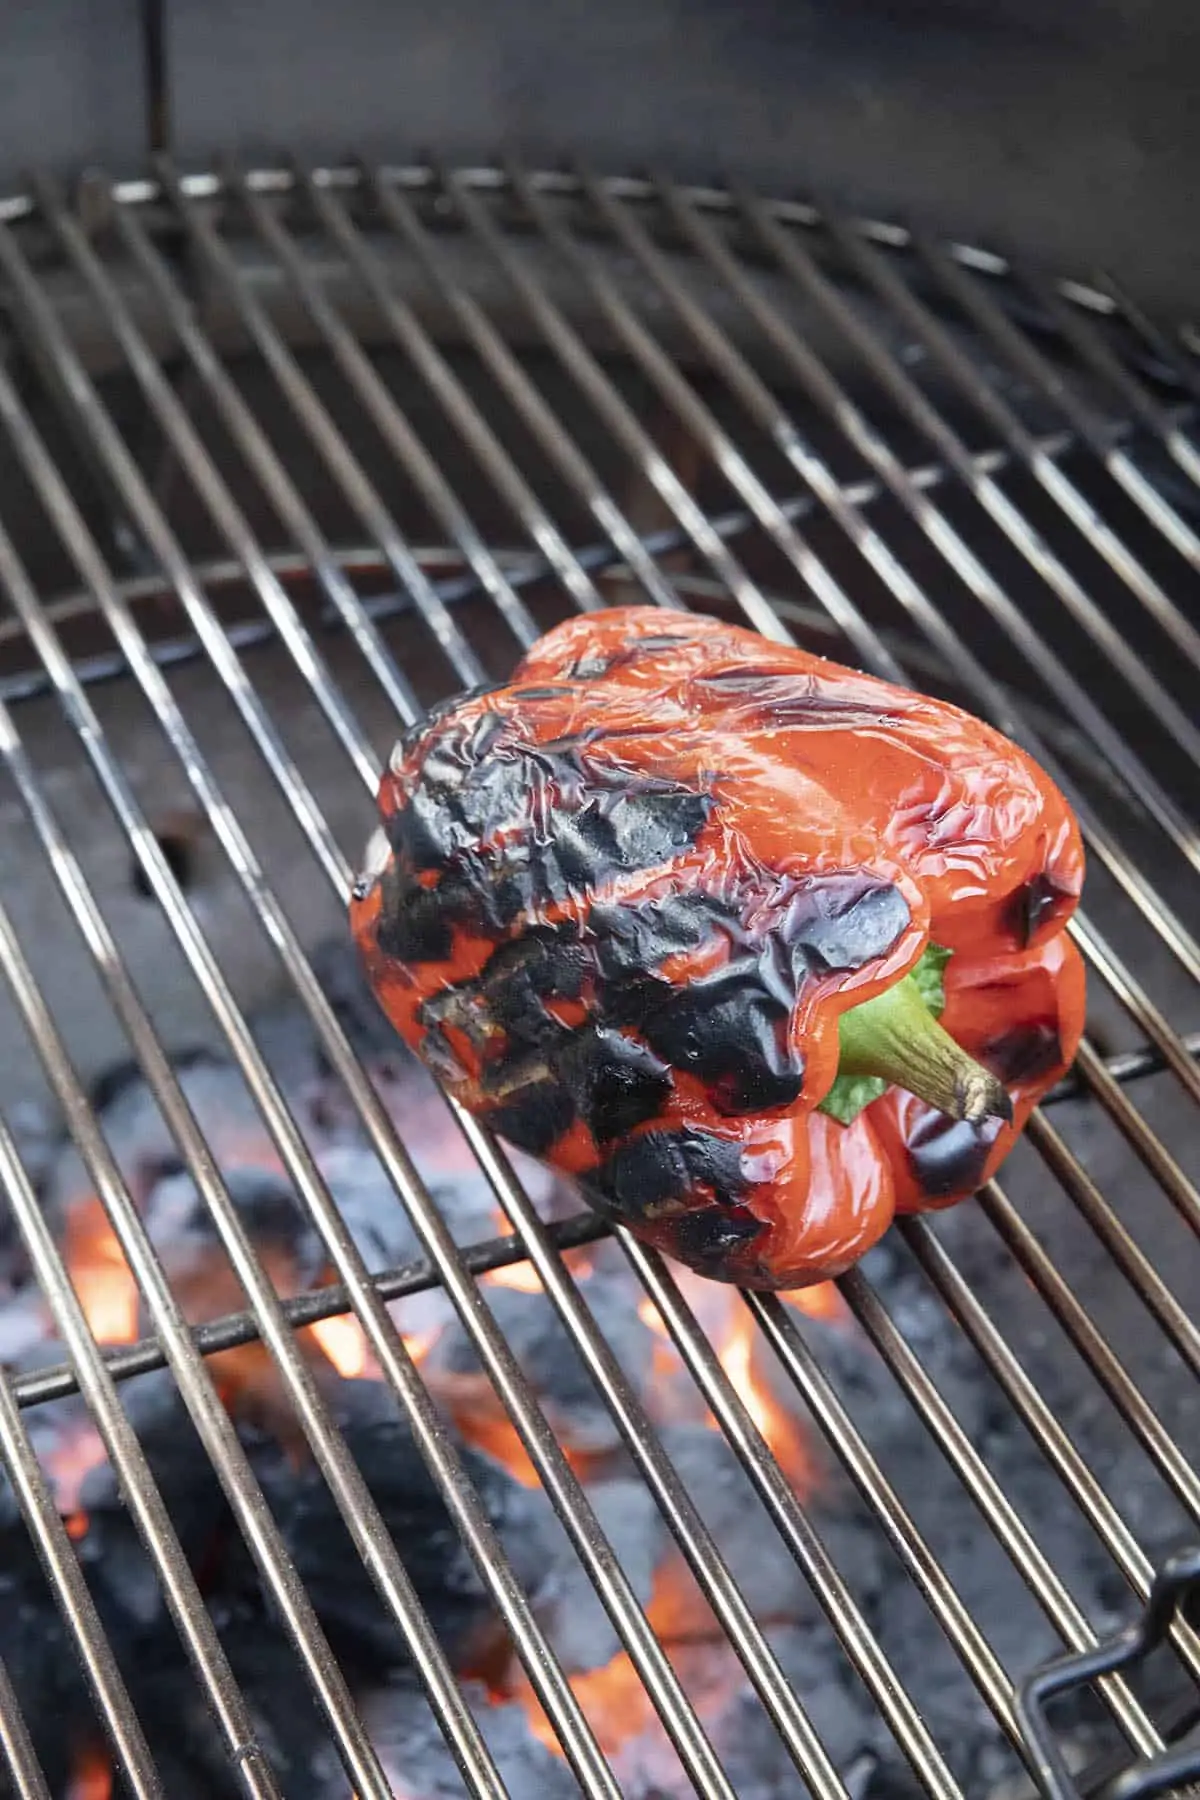 Roasting a red pepper on the charcoal grill